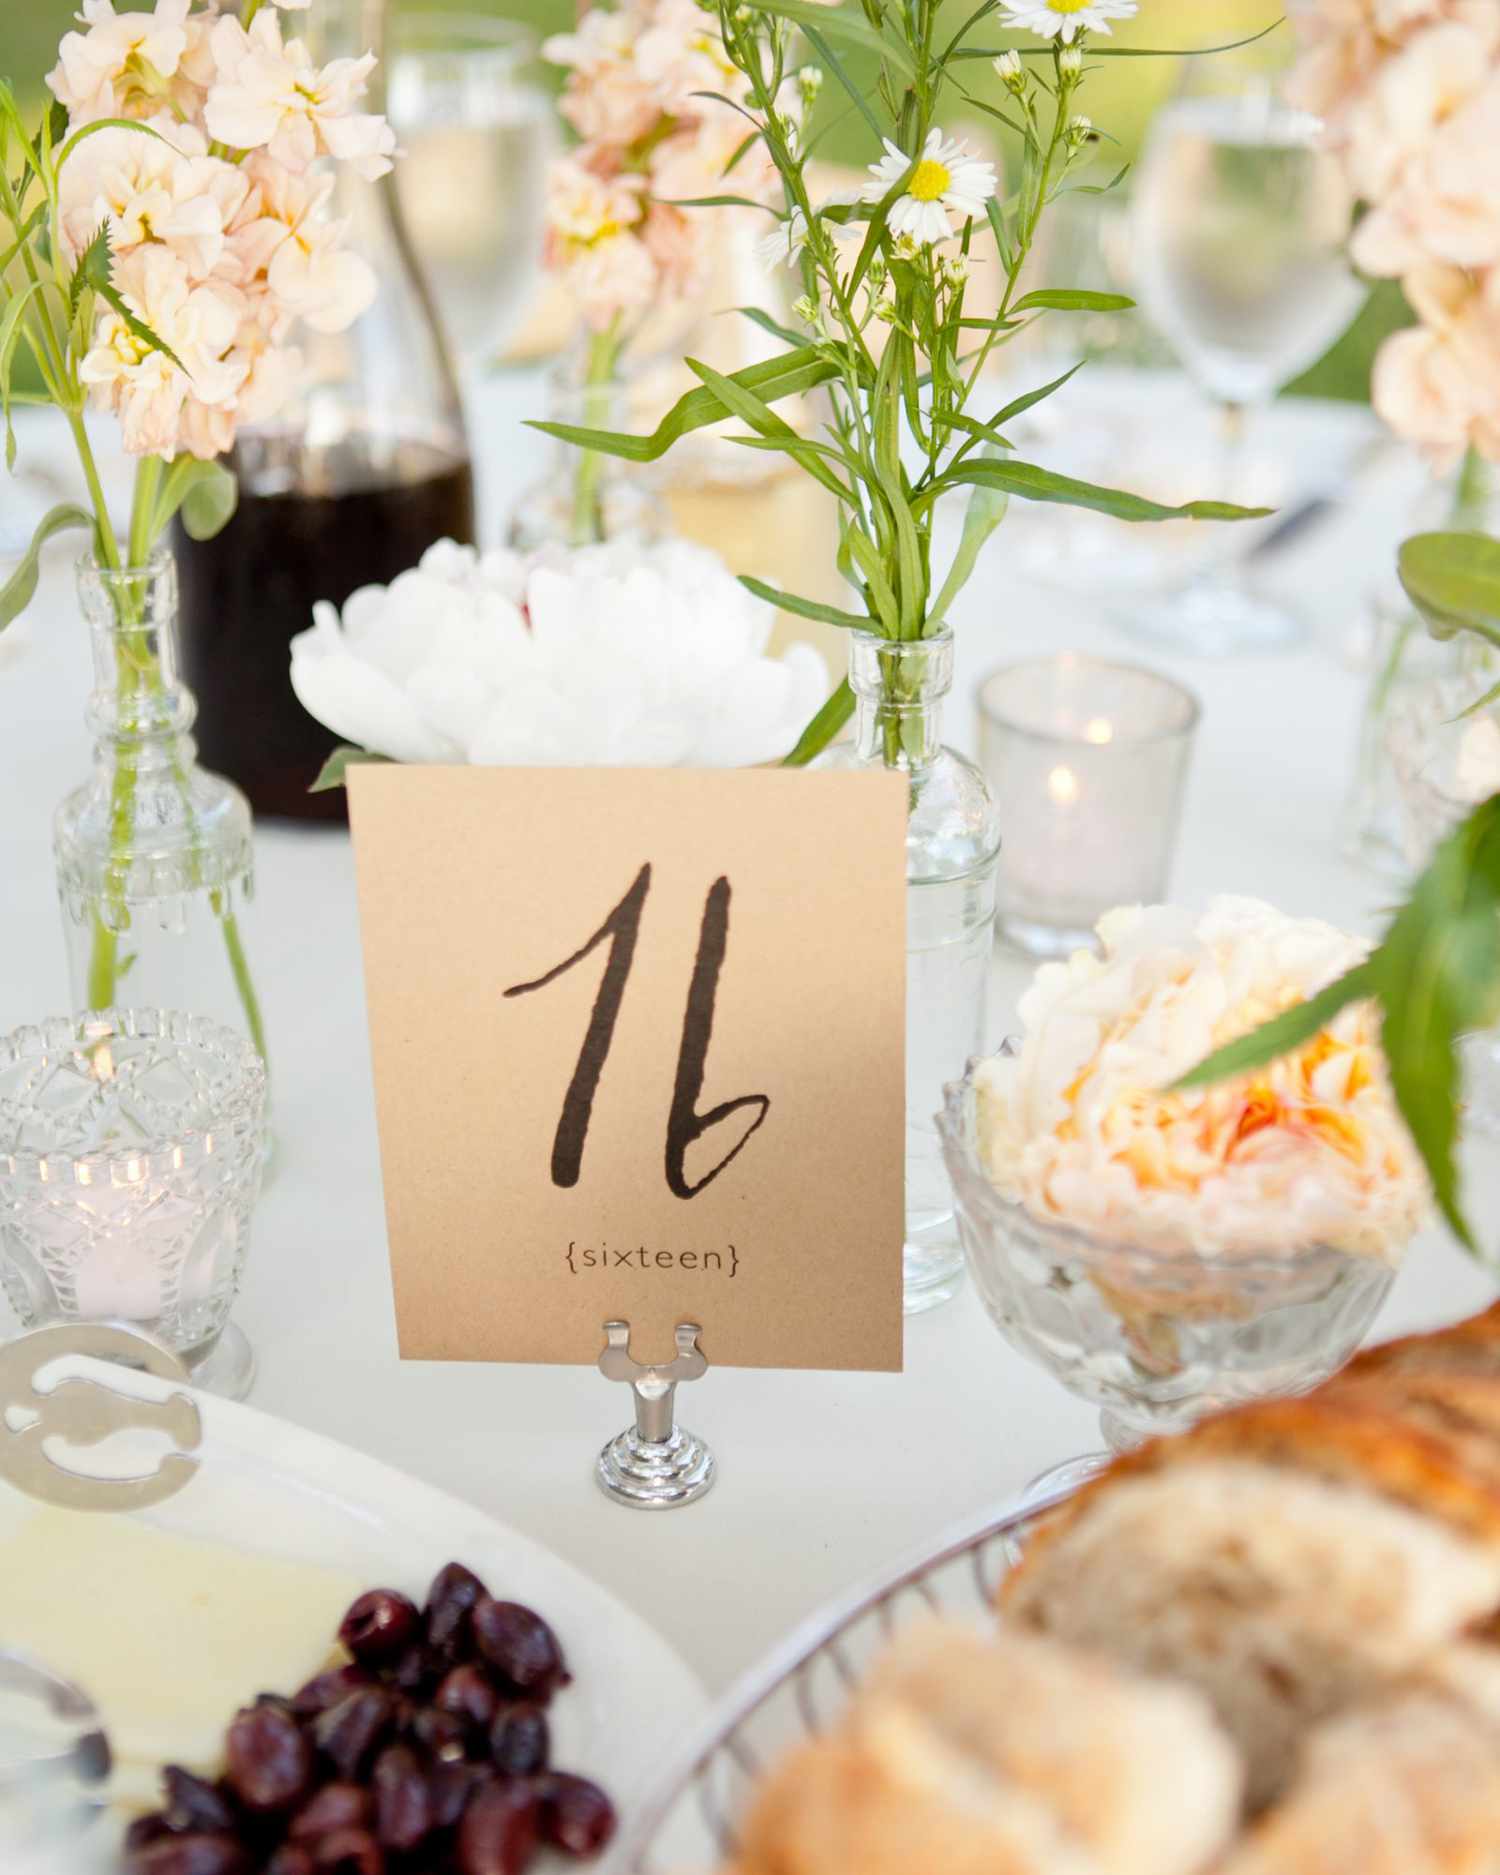 Bride-Designed Table Numbers